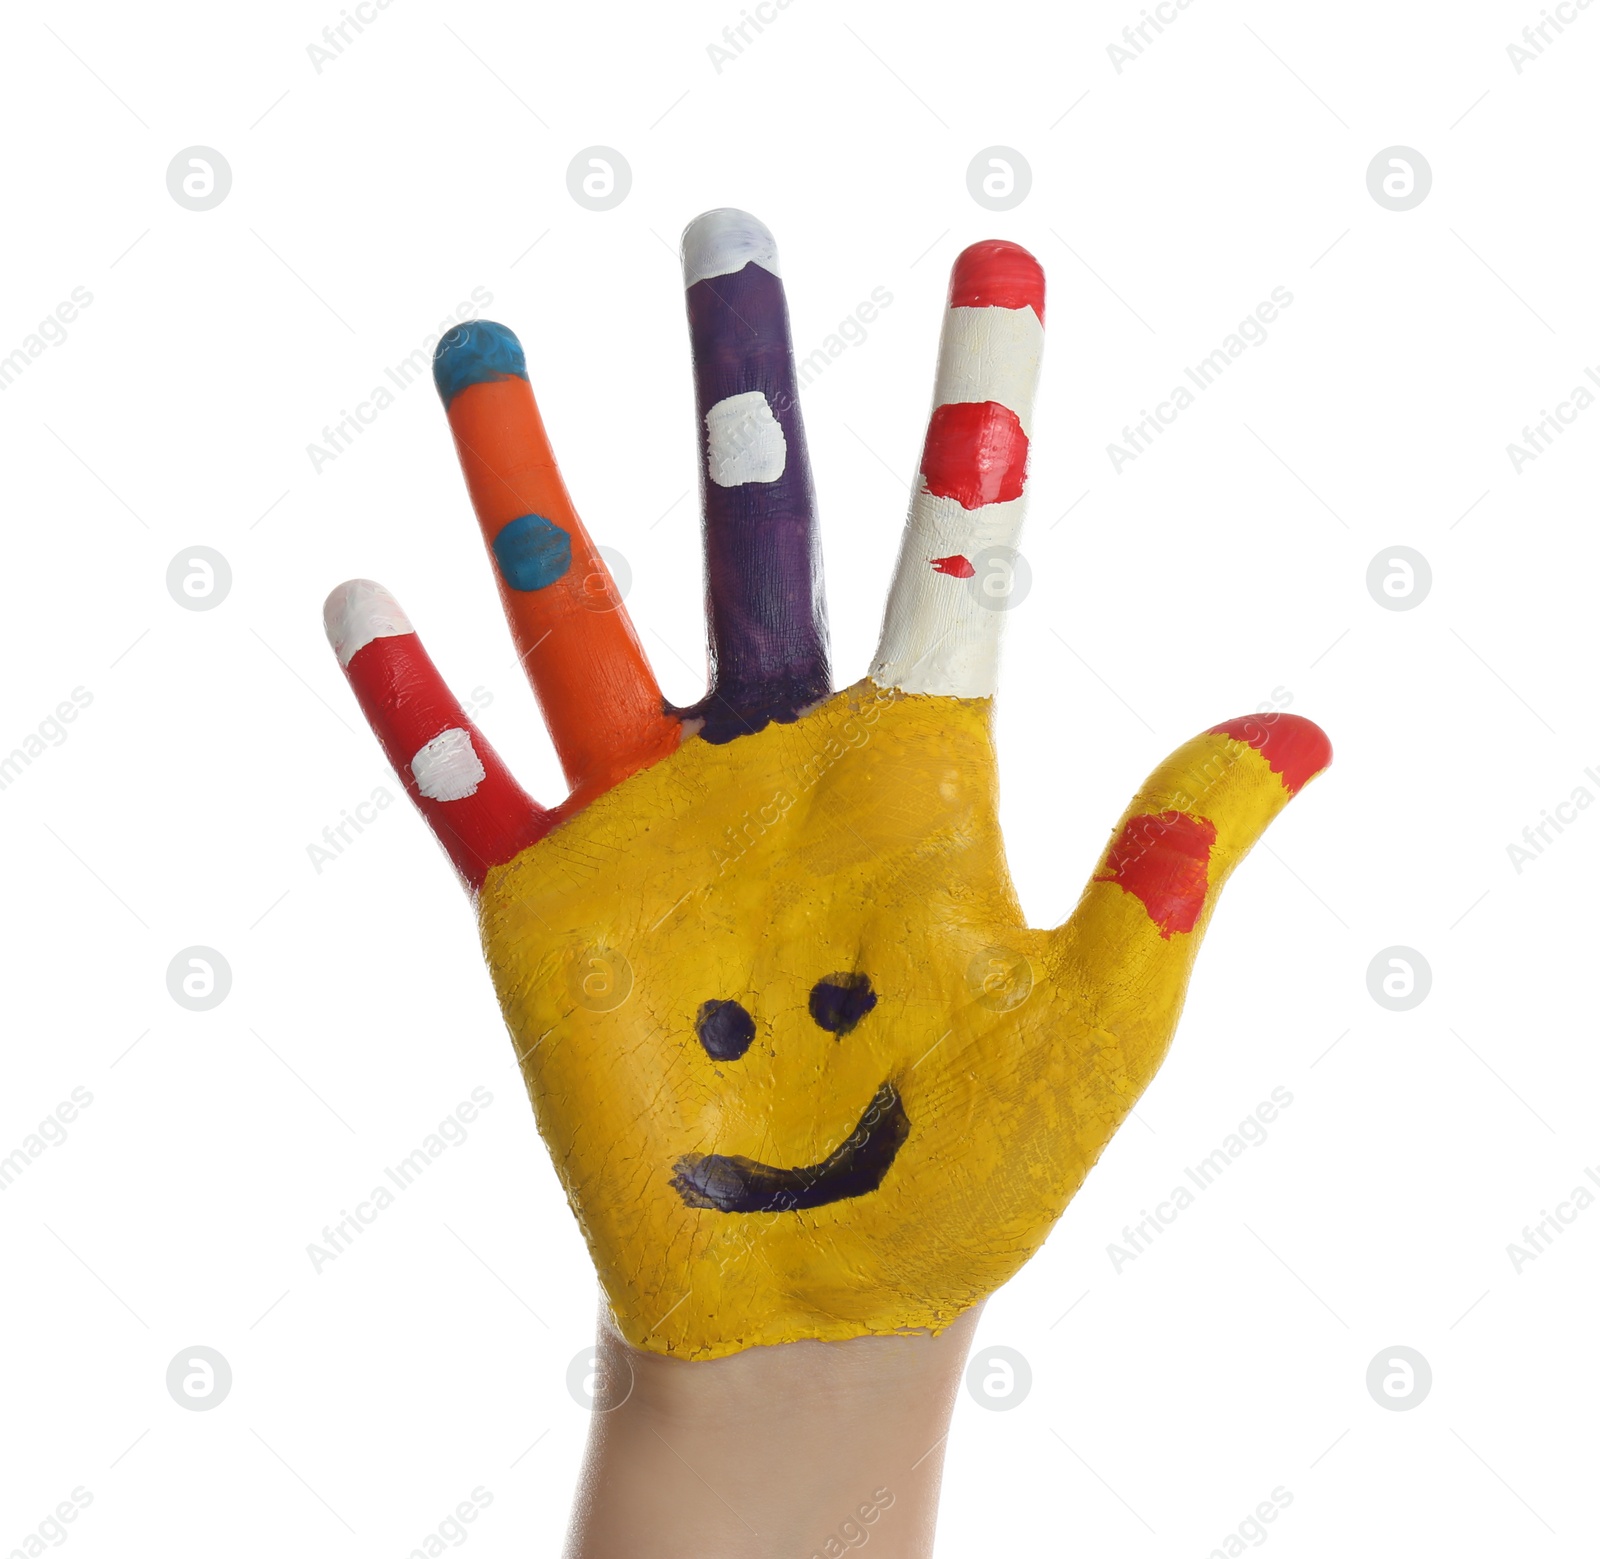 Photo of Kid with smiling face drawn on palm against white background, closeup